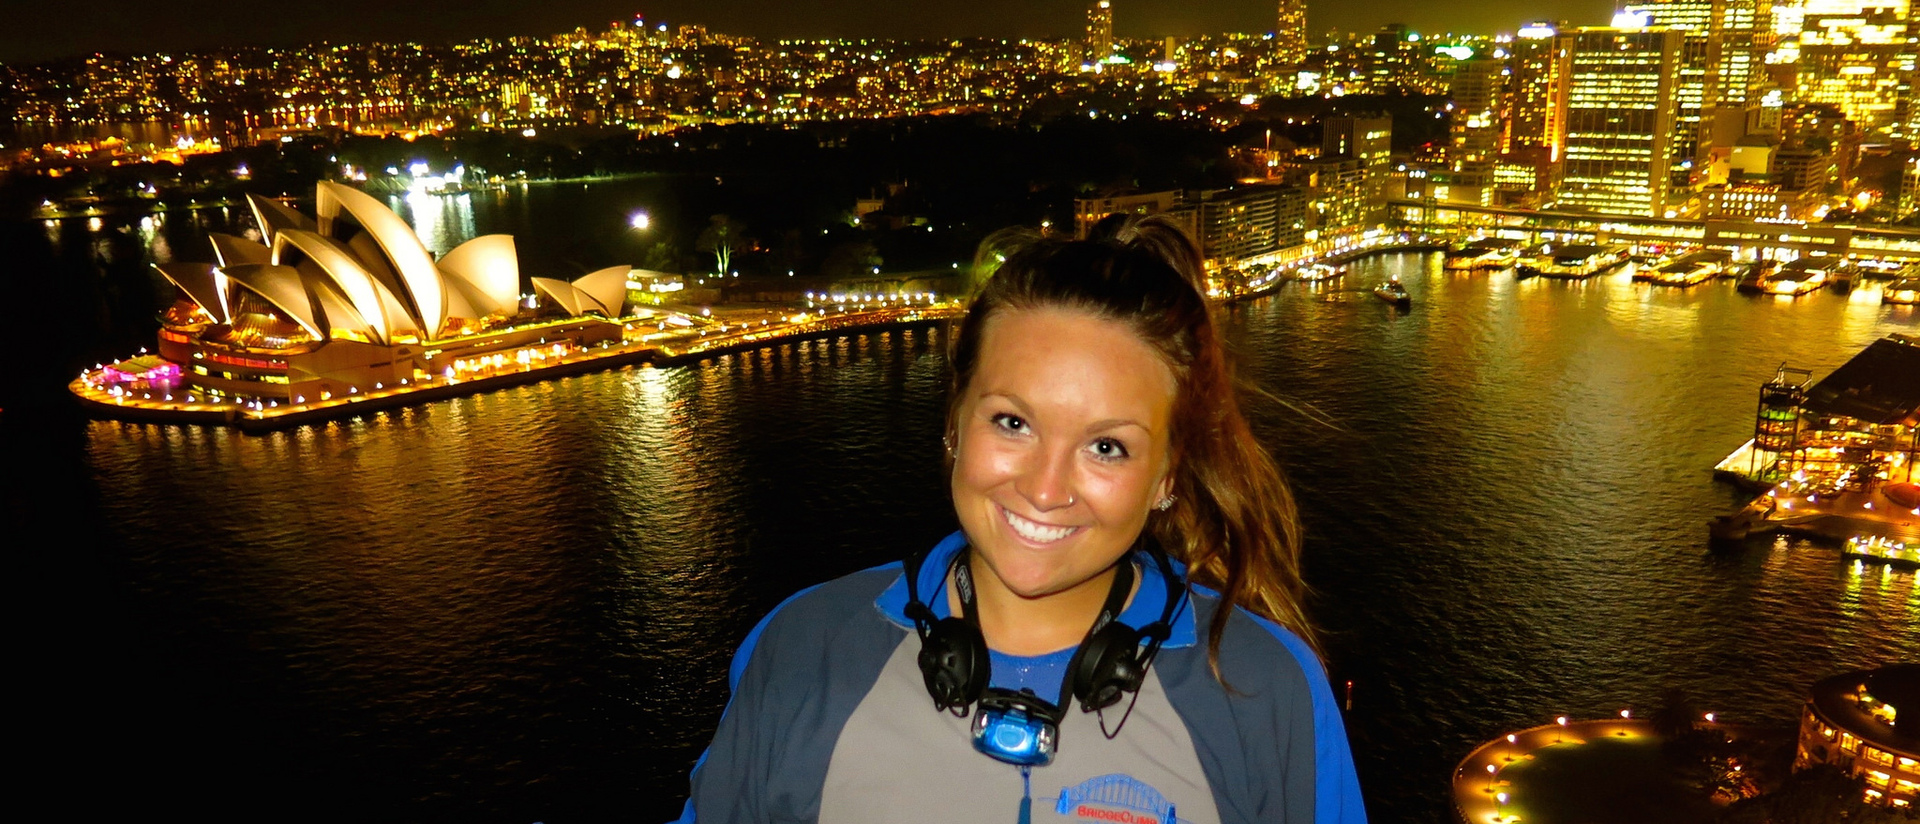 UW-Eau Claire student studying abroad in Australia